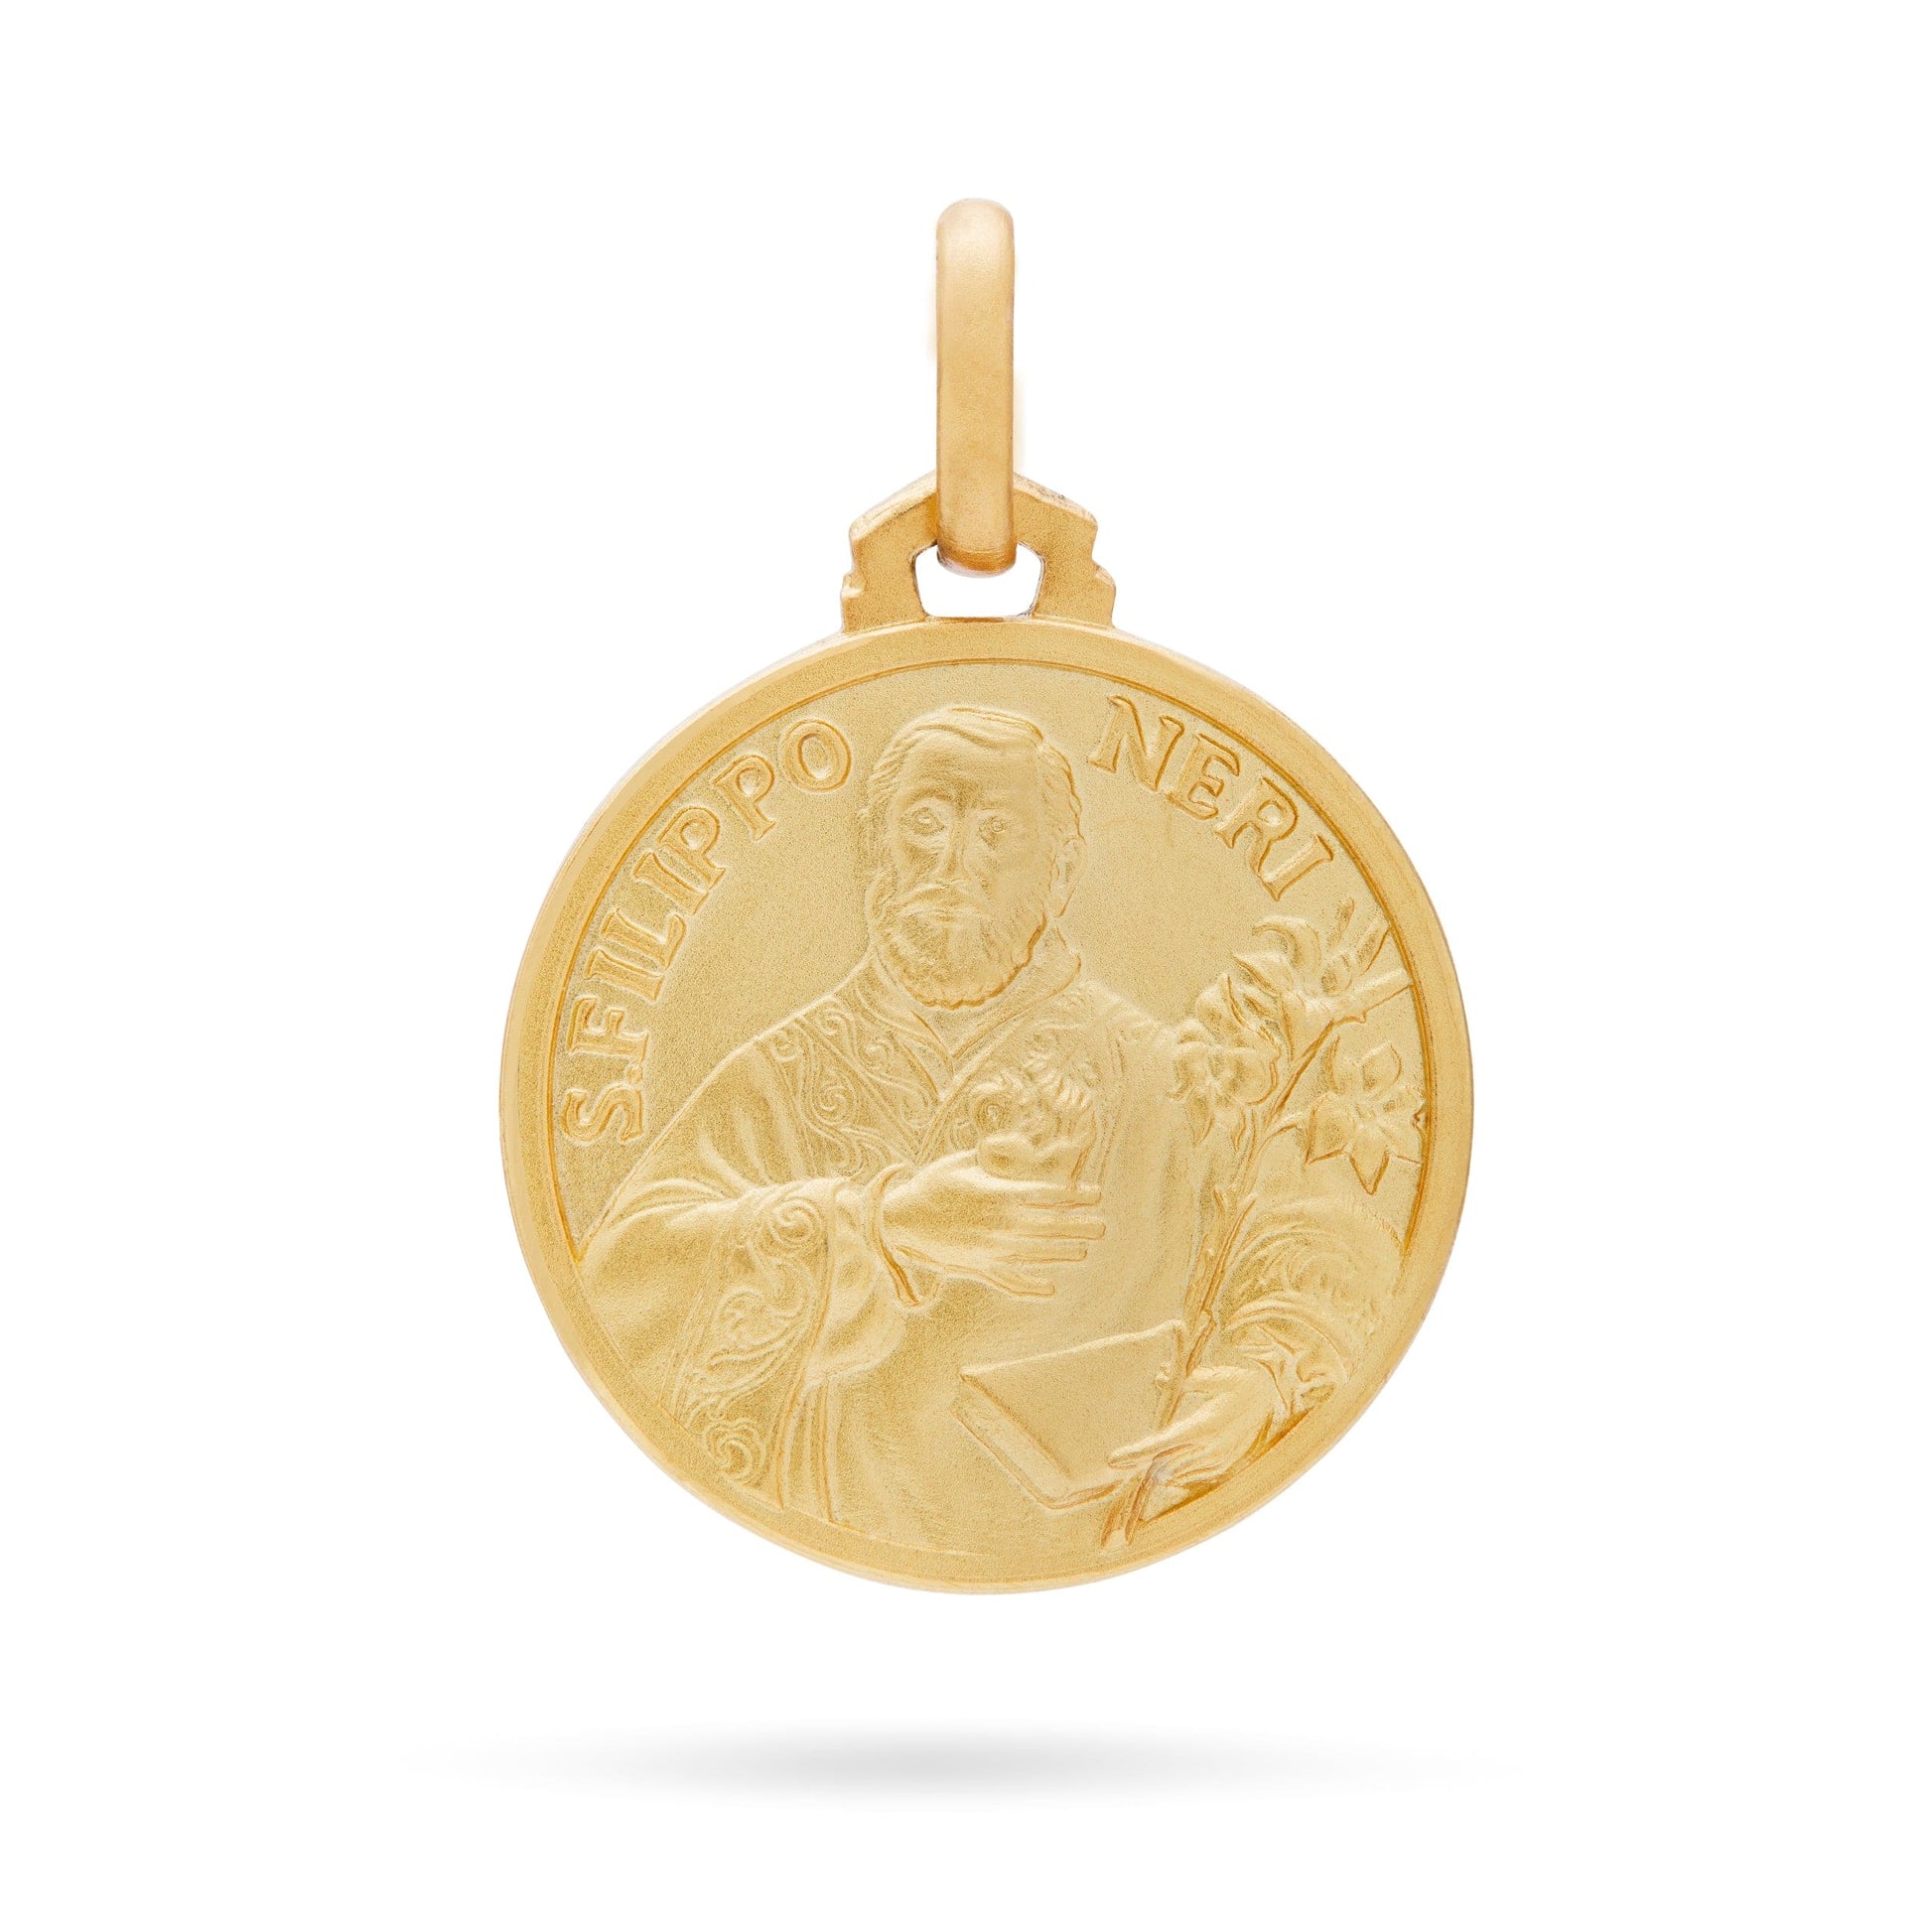 MONDO CATTOLICO Jewelry 18 mm (0.70 in) Yellow Gold Medal of Saint Philip Neri